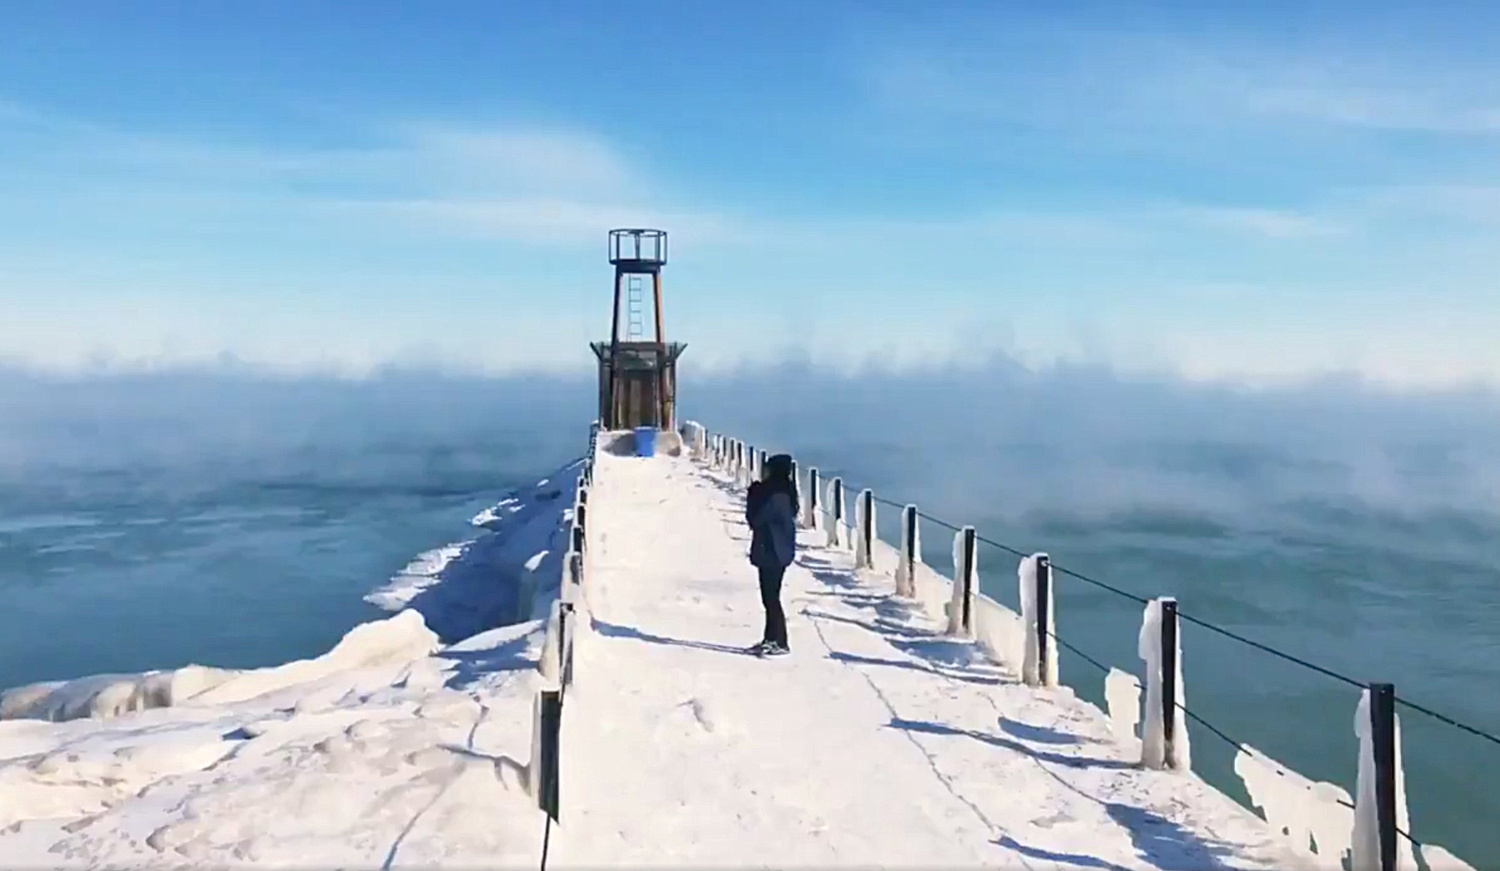 A view of the pier on Lake Michigan during subzero temperatures due to the polar vortex weather system in Chicago